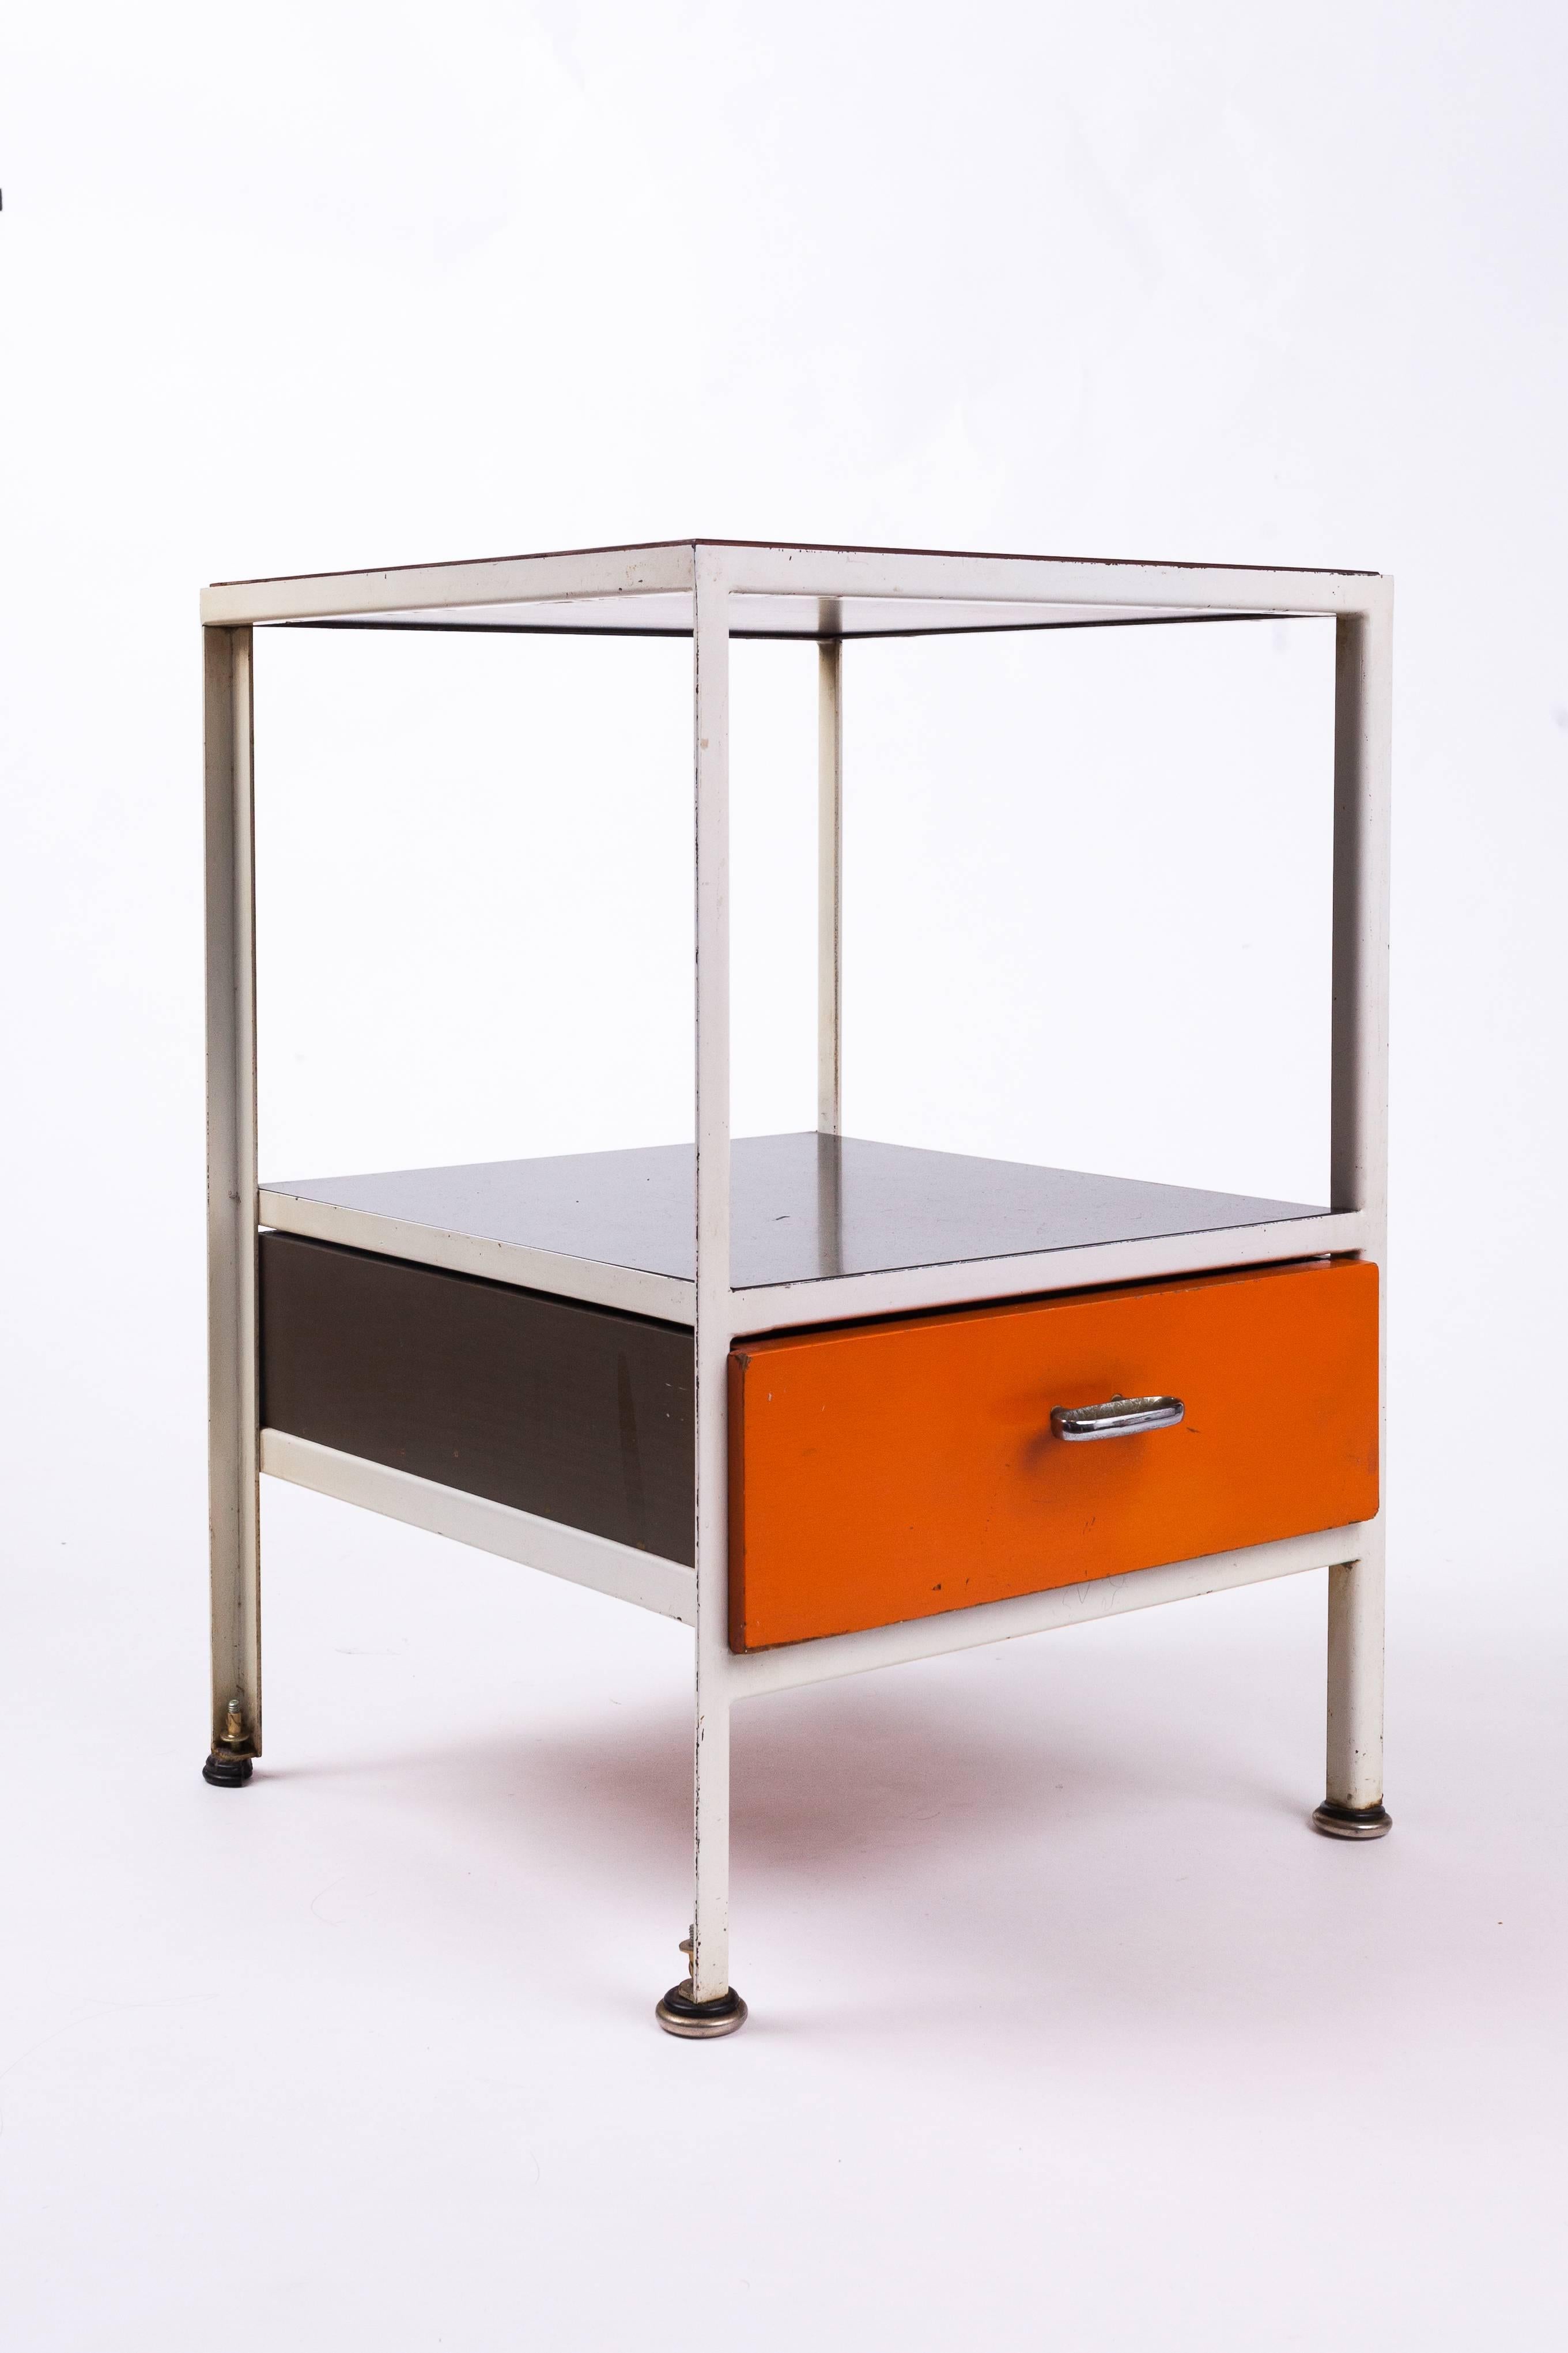 George Nelson (1908–1986)

Streamlined and playful early steel-frame nightstand or end table by George Nelson for Herman Miller, in orange, brown, and white enameled steel with a lacquered wood top and aluminum handle. The light, geometric design